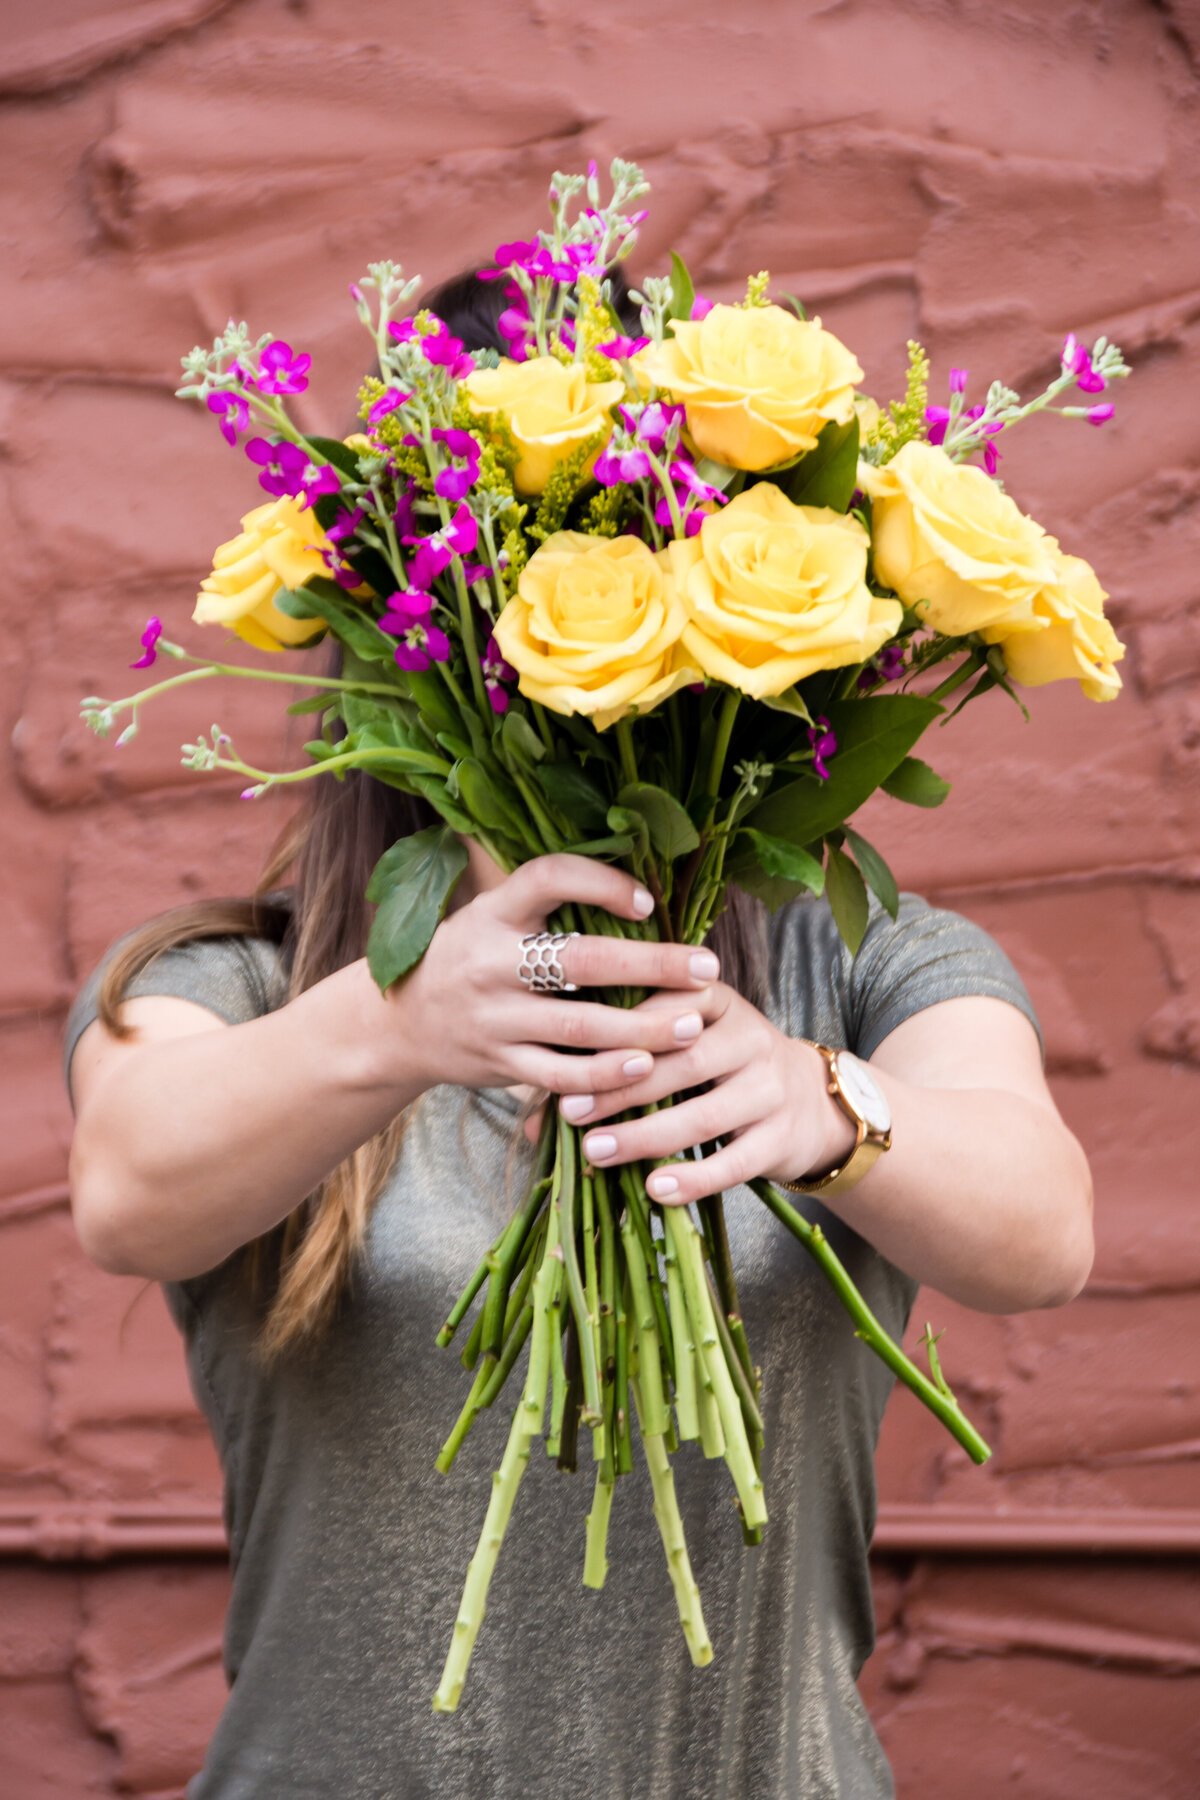 Woman holds bouquet of yellow and pink flowers up in front of her face